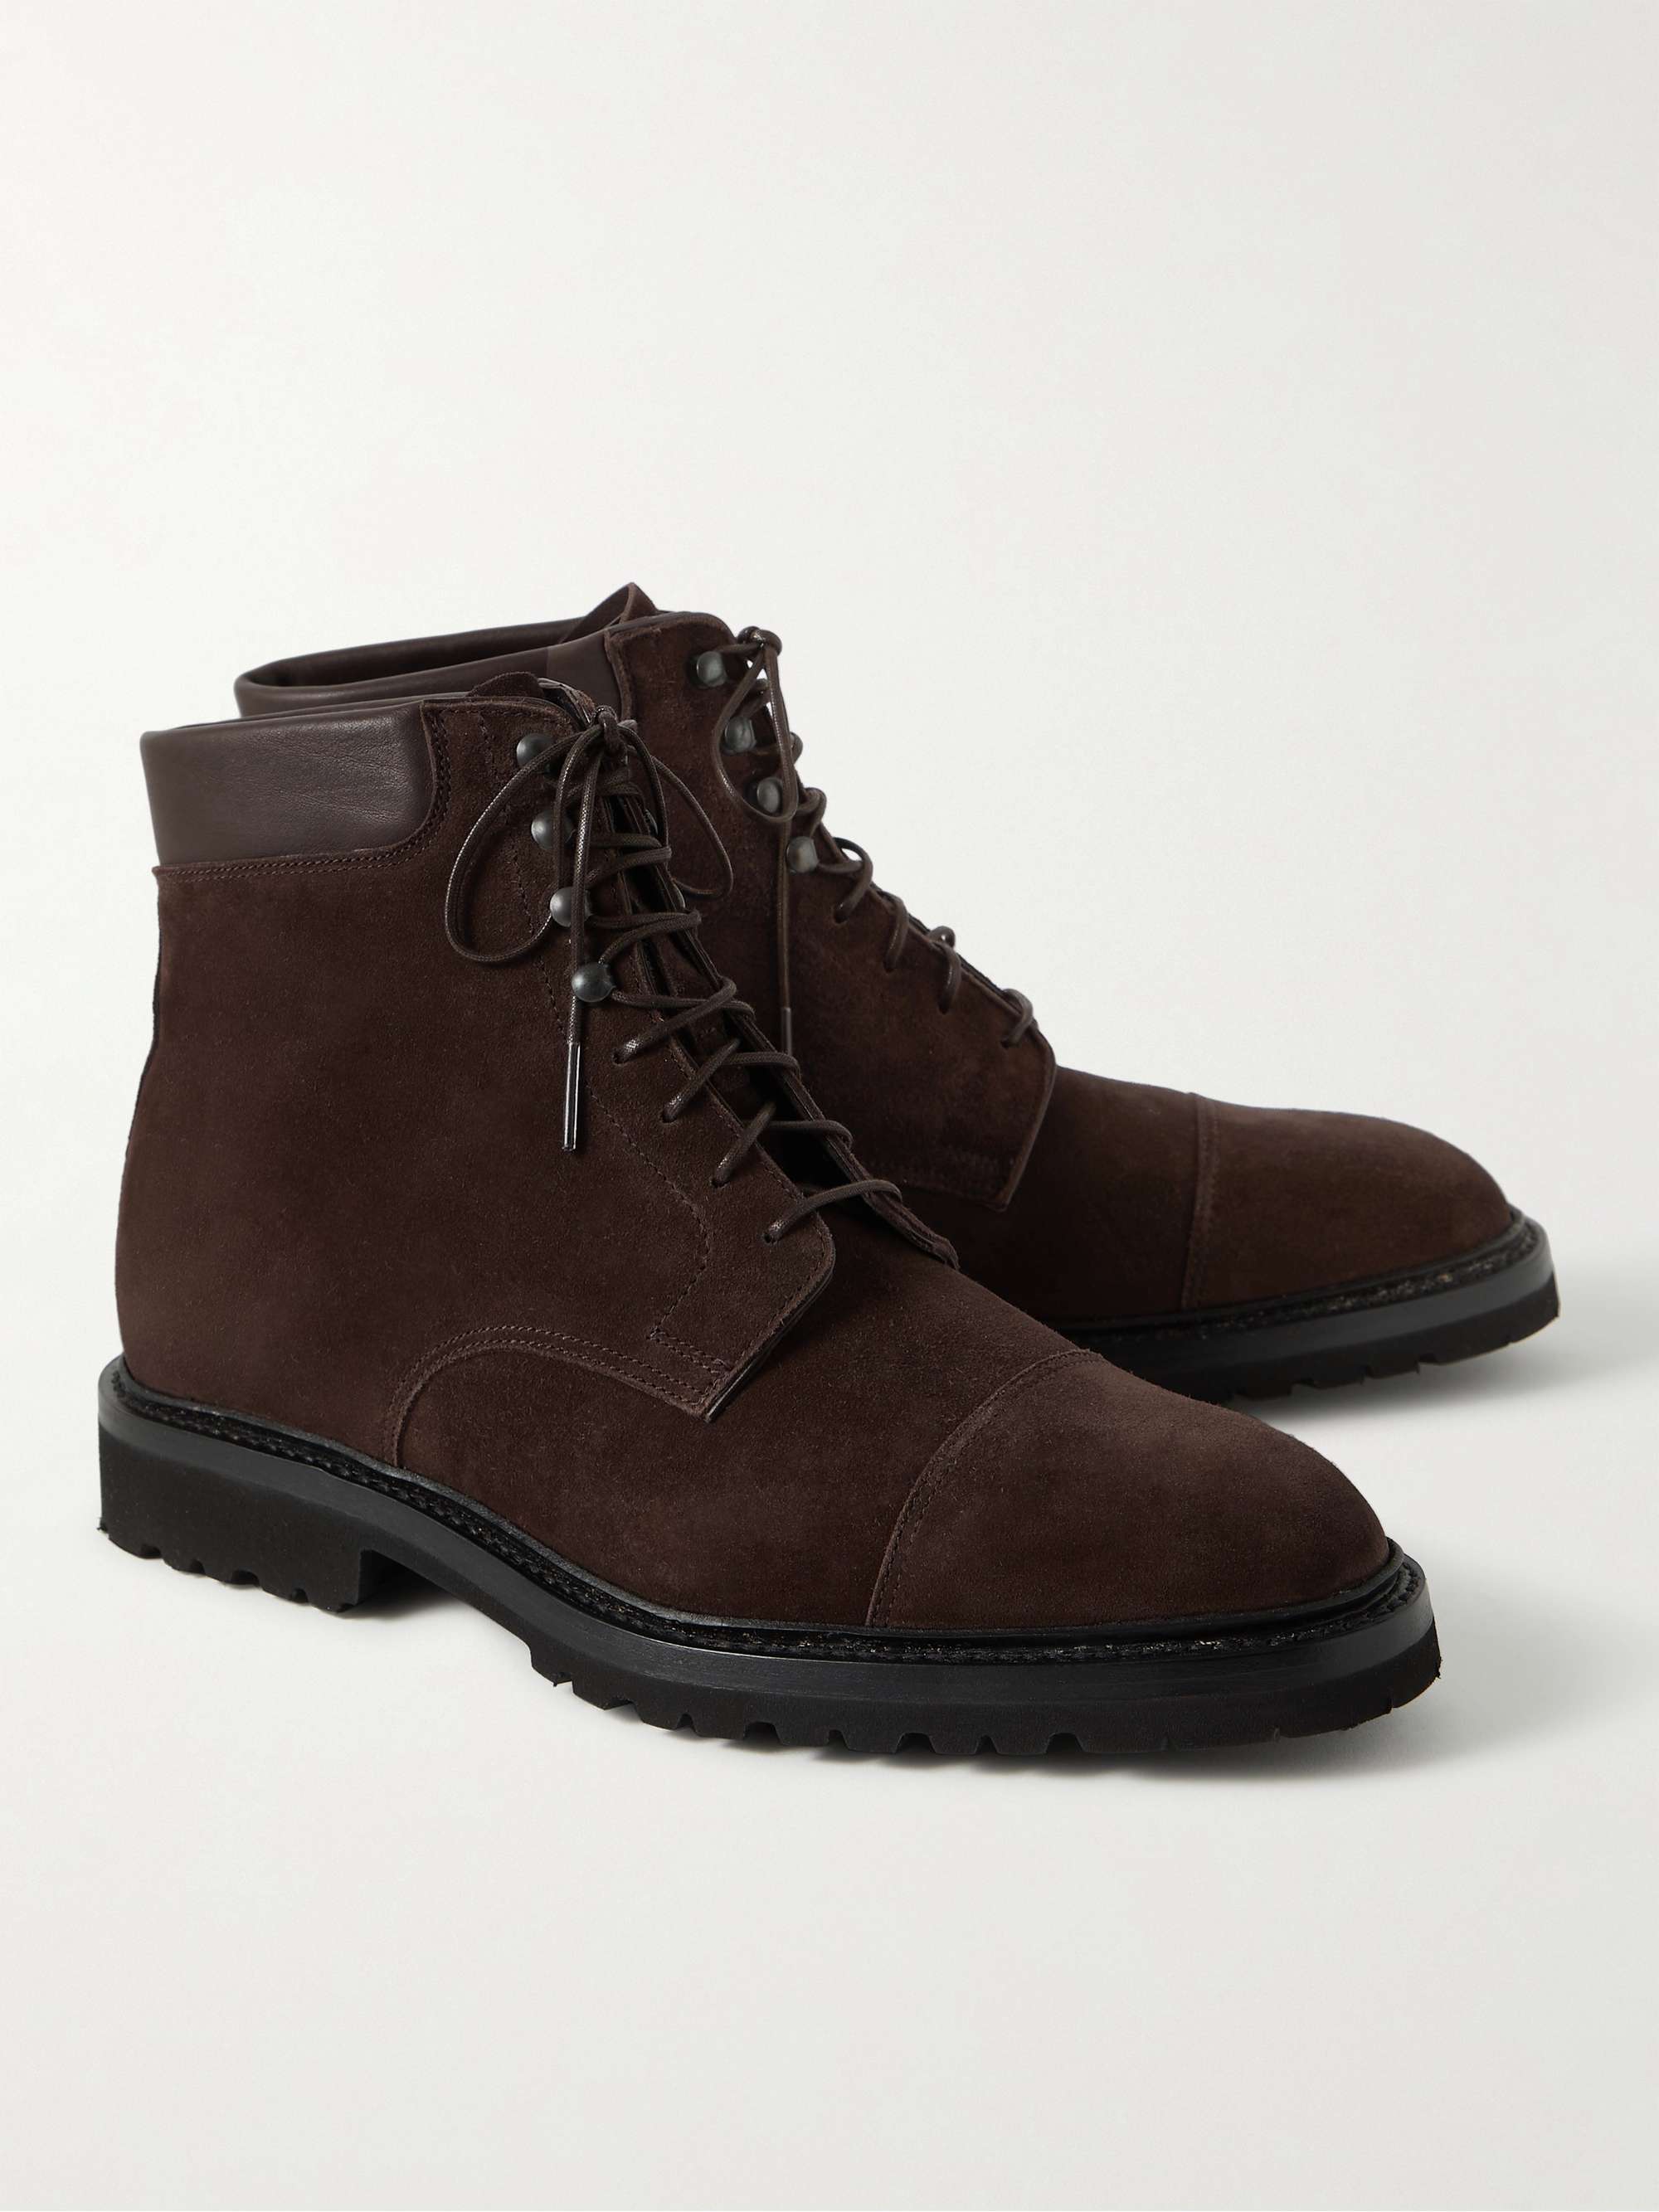 GEORGE CLEVERLEY Taron Leather-Trimmed Suede Boots